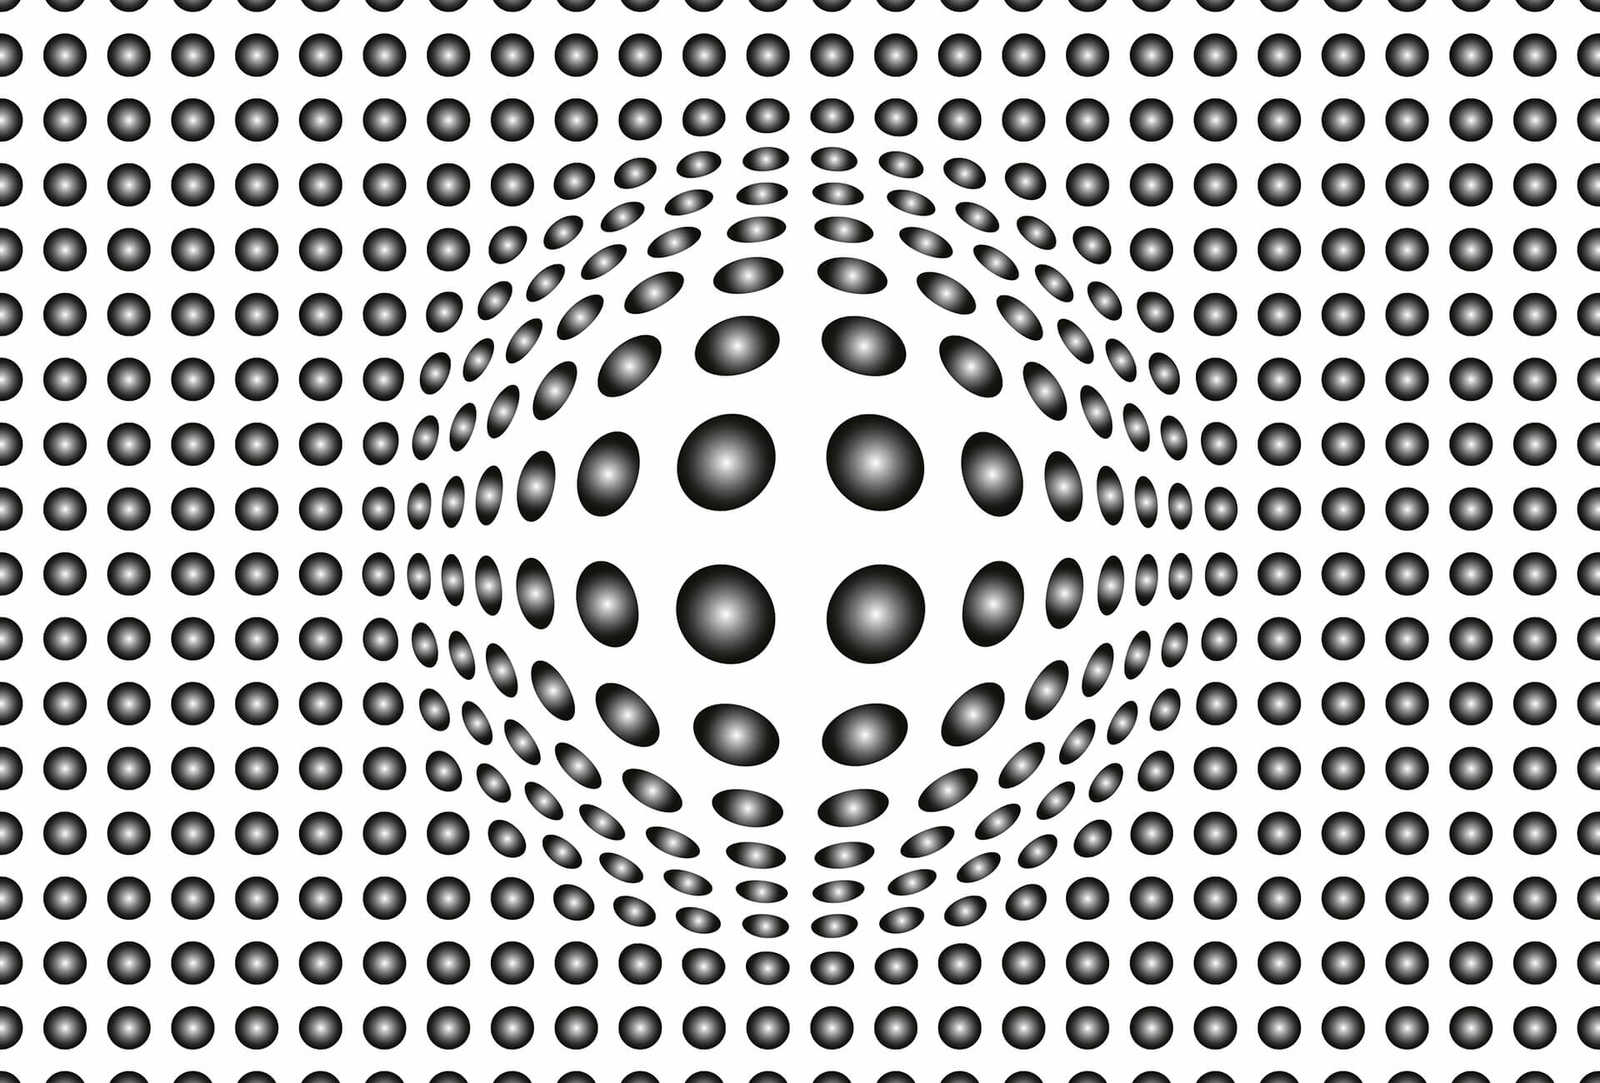         3D mural black and white with dot pattern
    